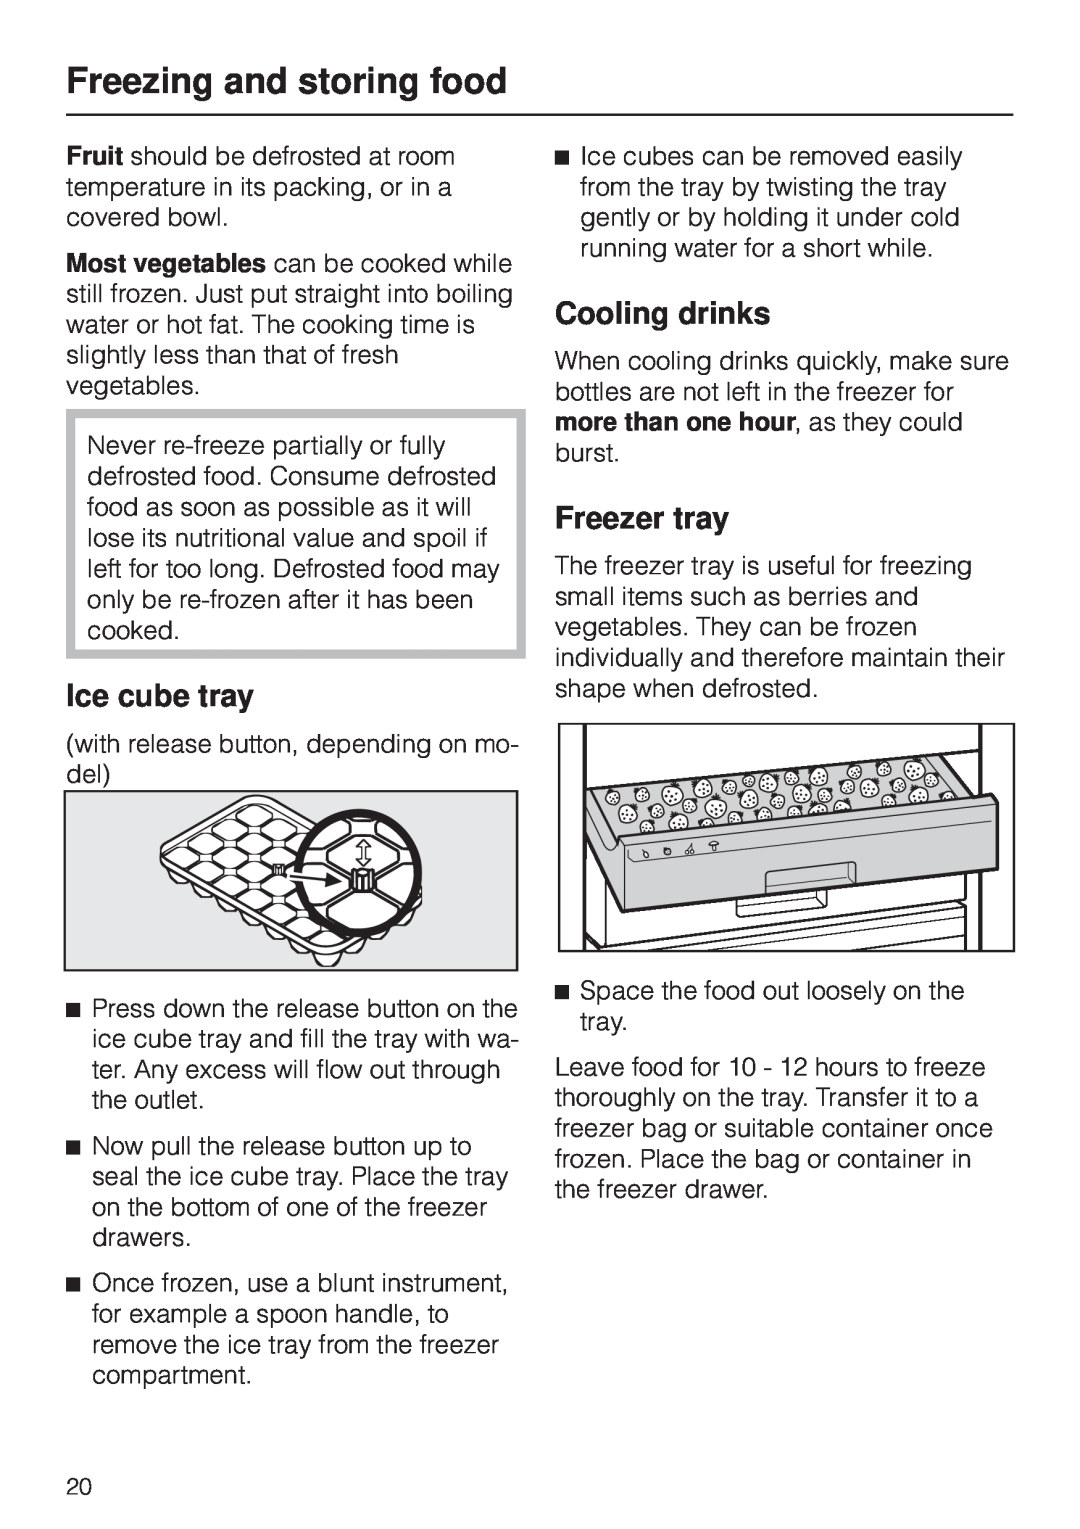 Miele F 311 i-6 installation instructions Ice cube tray, Cooling drinks, Freezer tray, Freezing and storing food 